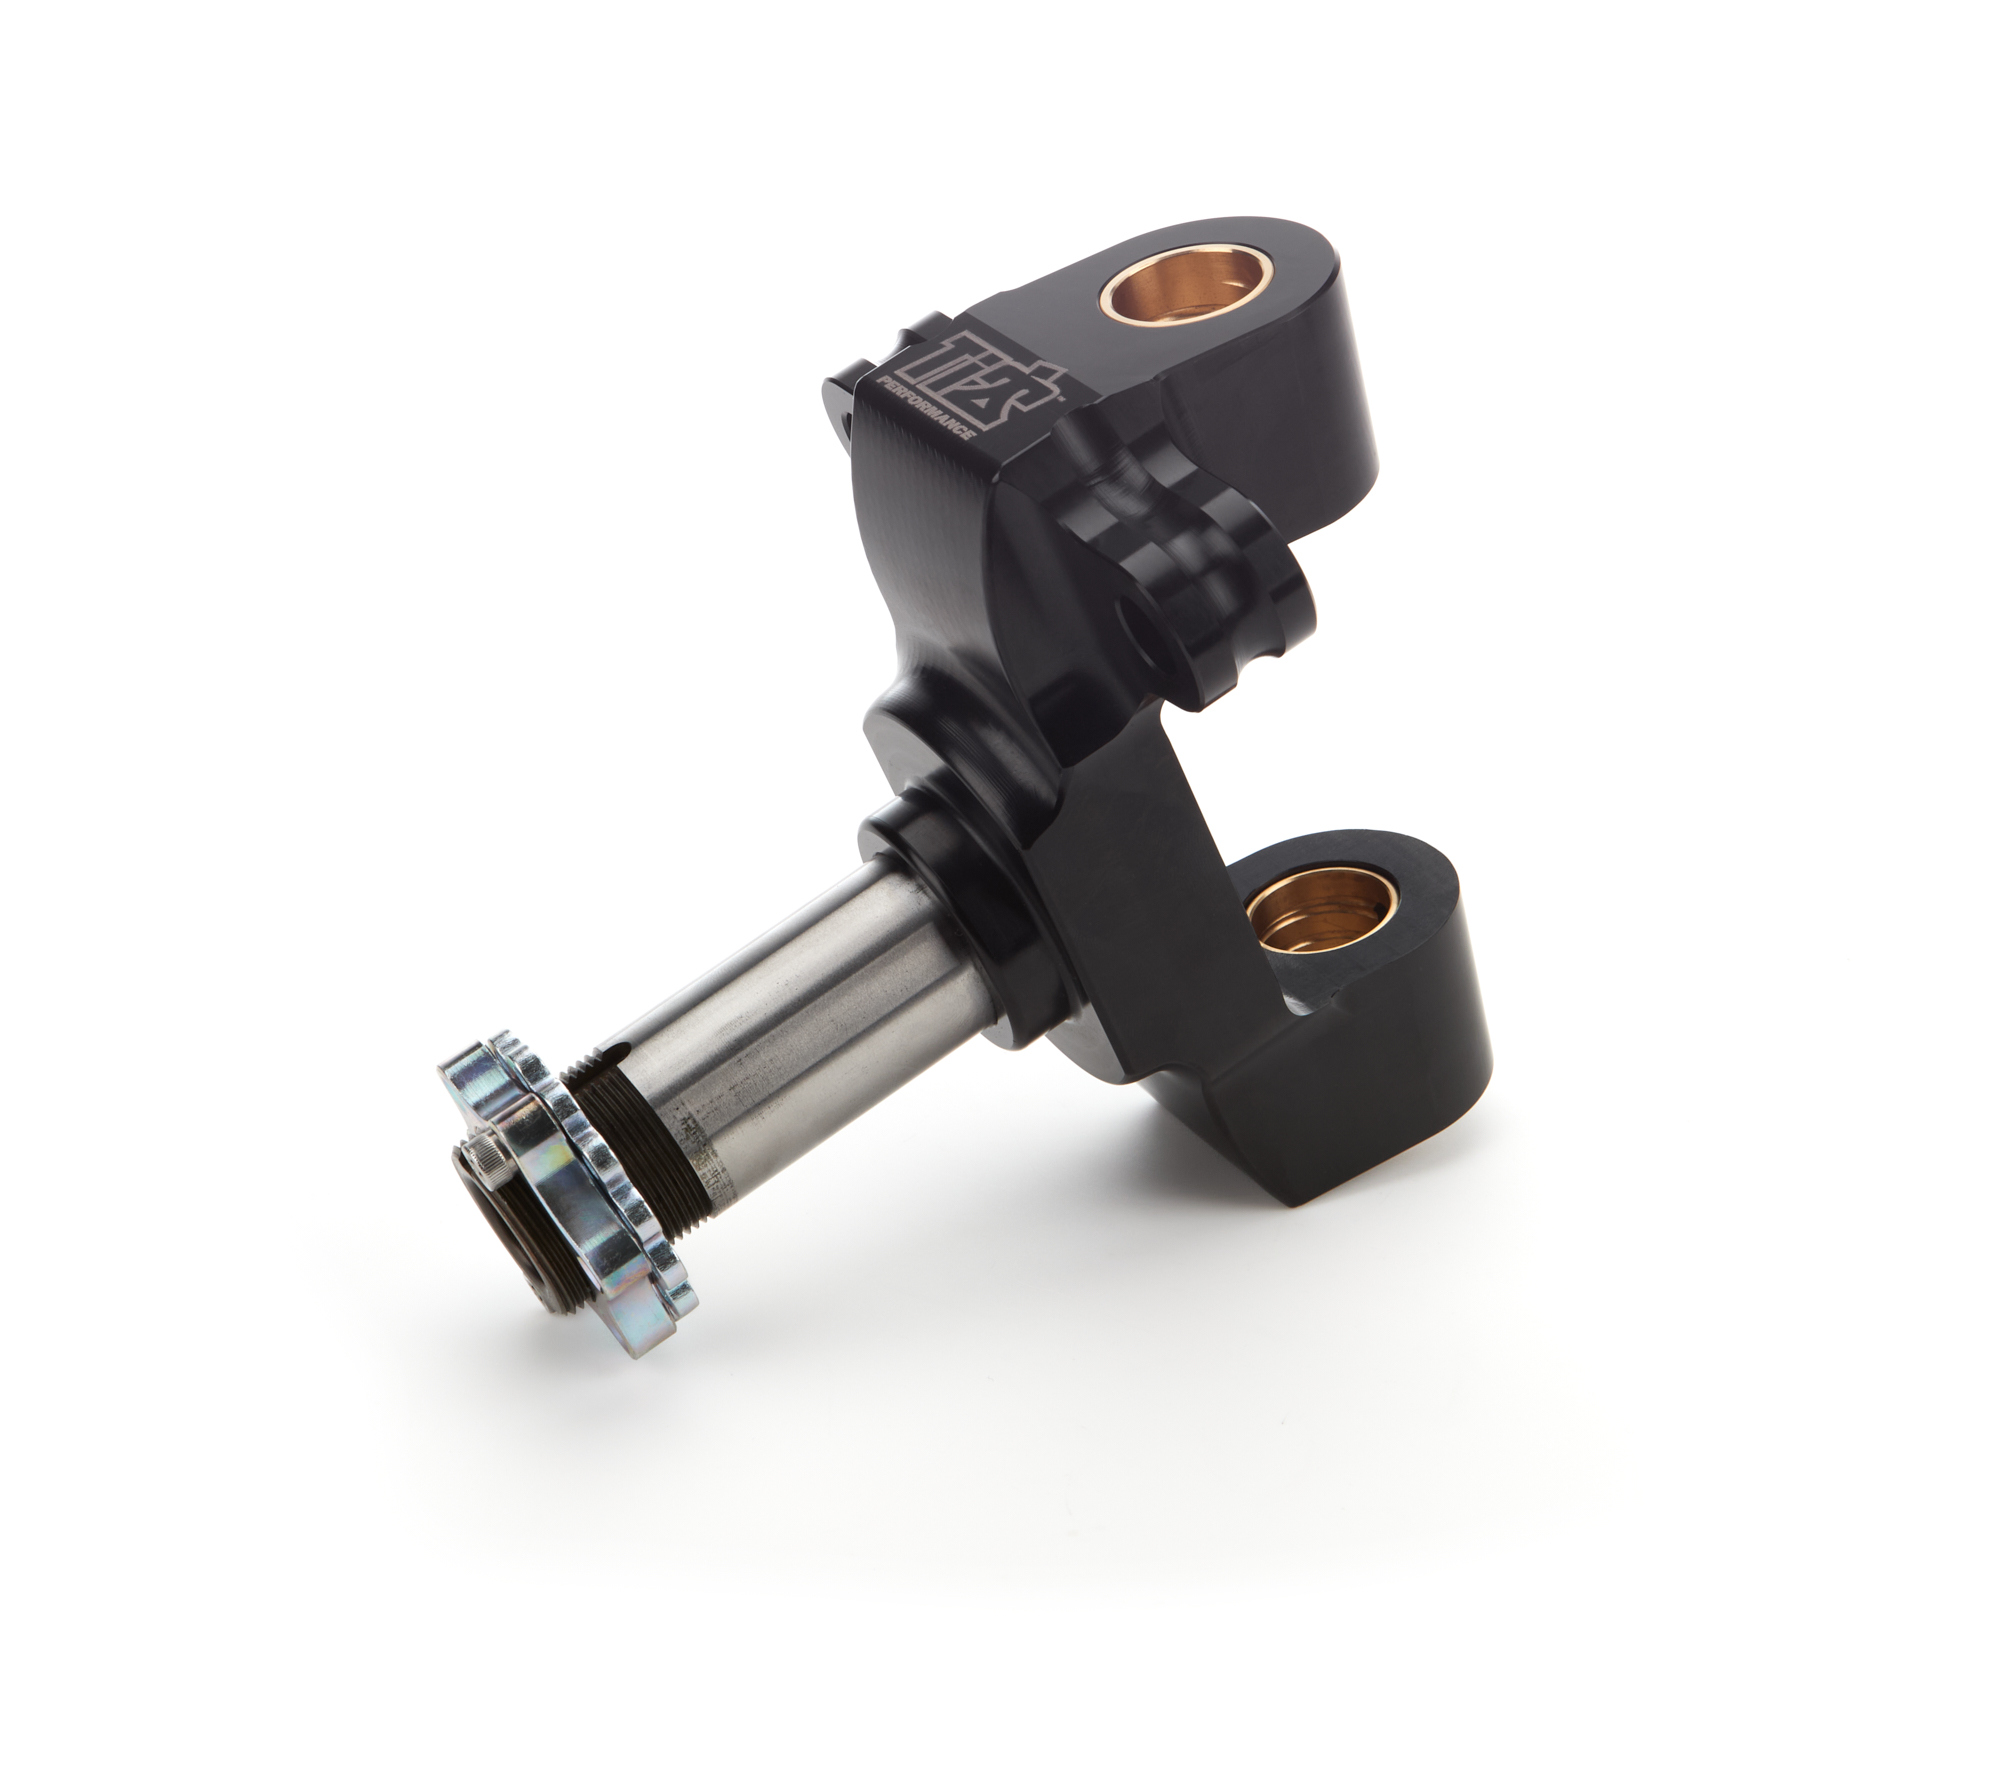 Ti22 Performance 2850 - Spindle, Aluminum Body, 9 Degree Steel Snout, Steel Locknut Included, Aluminum / Steel, Black Anodized / Natural, Sprint Car, Each